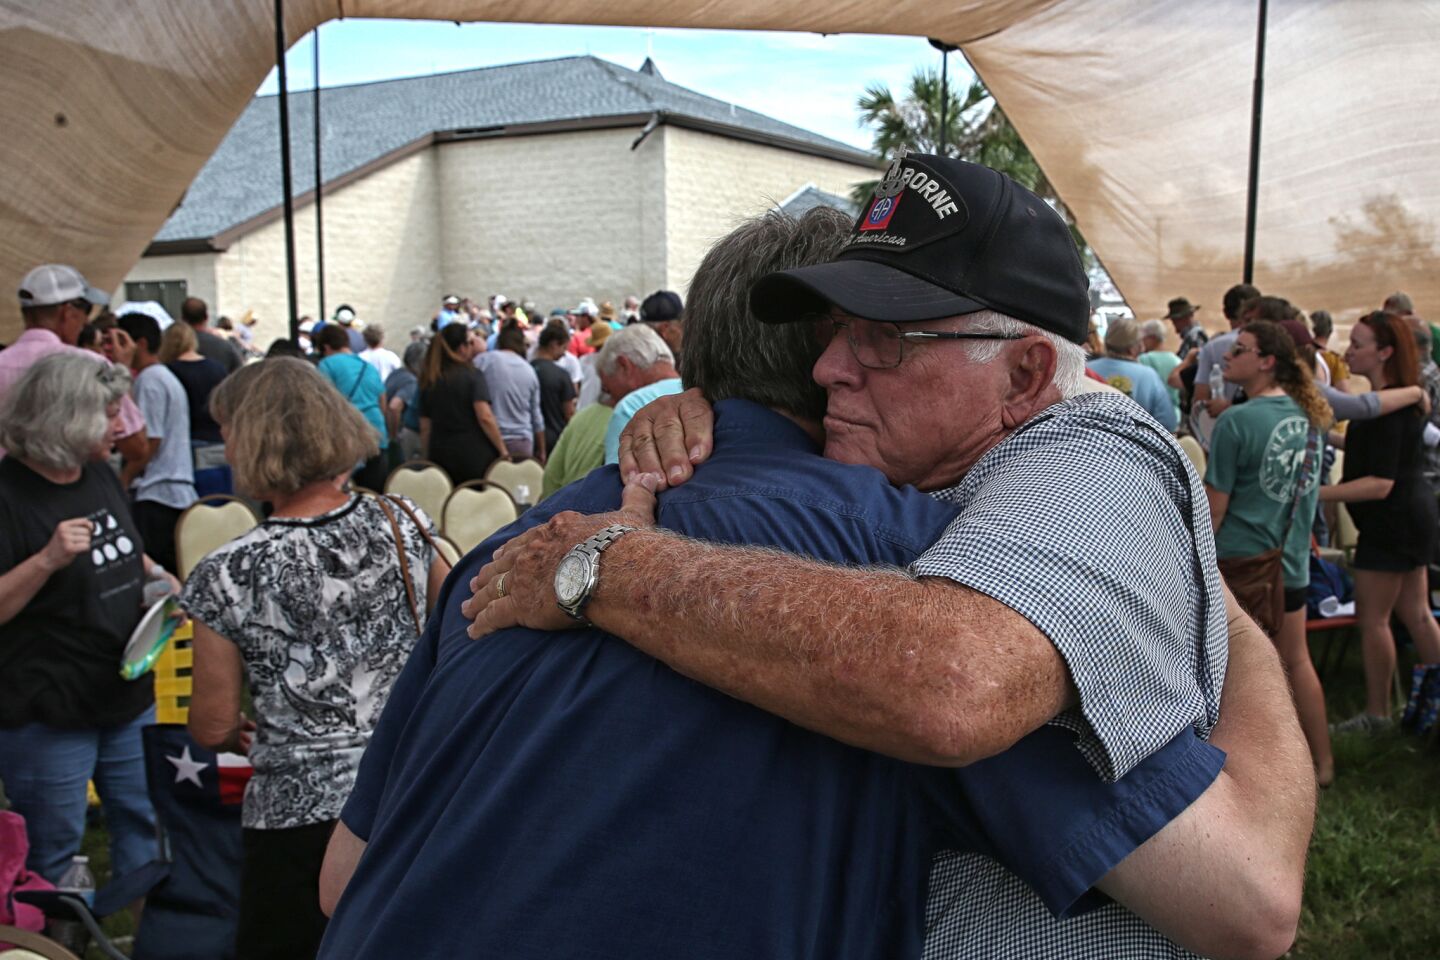 Ken Garrett, right, hugs Pastor Jordan Mims after they both delivered prayers on the grounds of the First Baptist Church in Rockport, Texas.